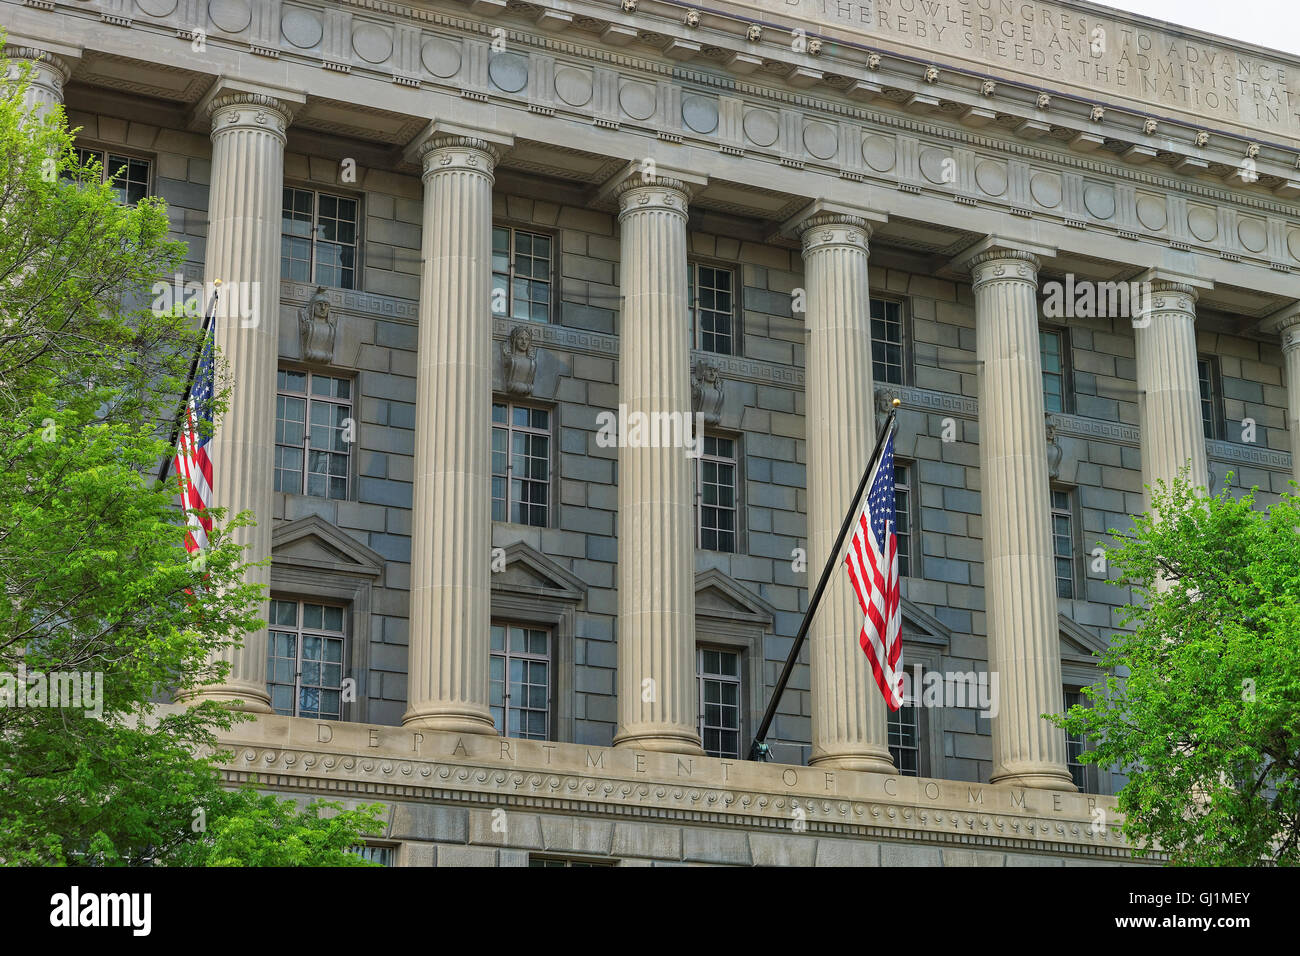 Department of Commerce is located in Herbert C. Hoover Building in Washington D.C., USA. It was built in 1932 and renamed after the former Secretary of Commerce and President in 1981. Stock Photo